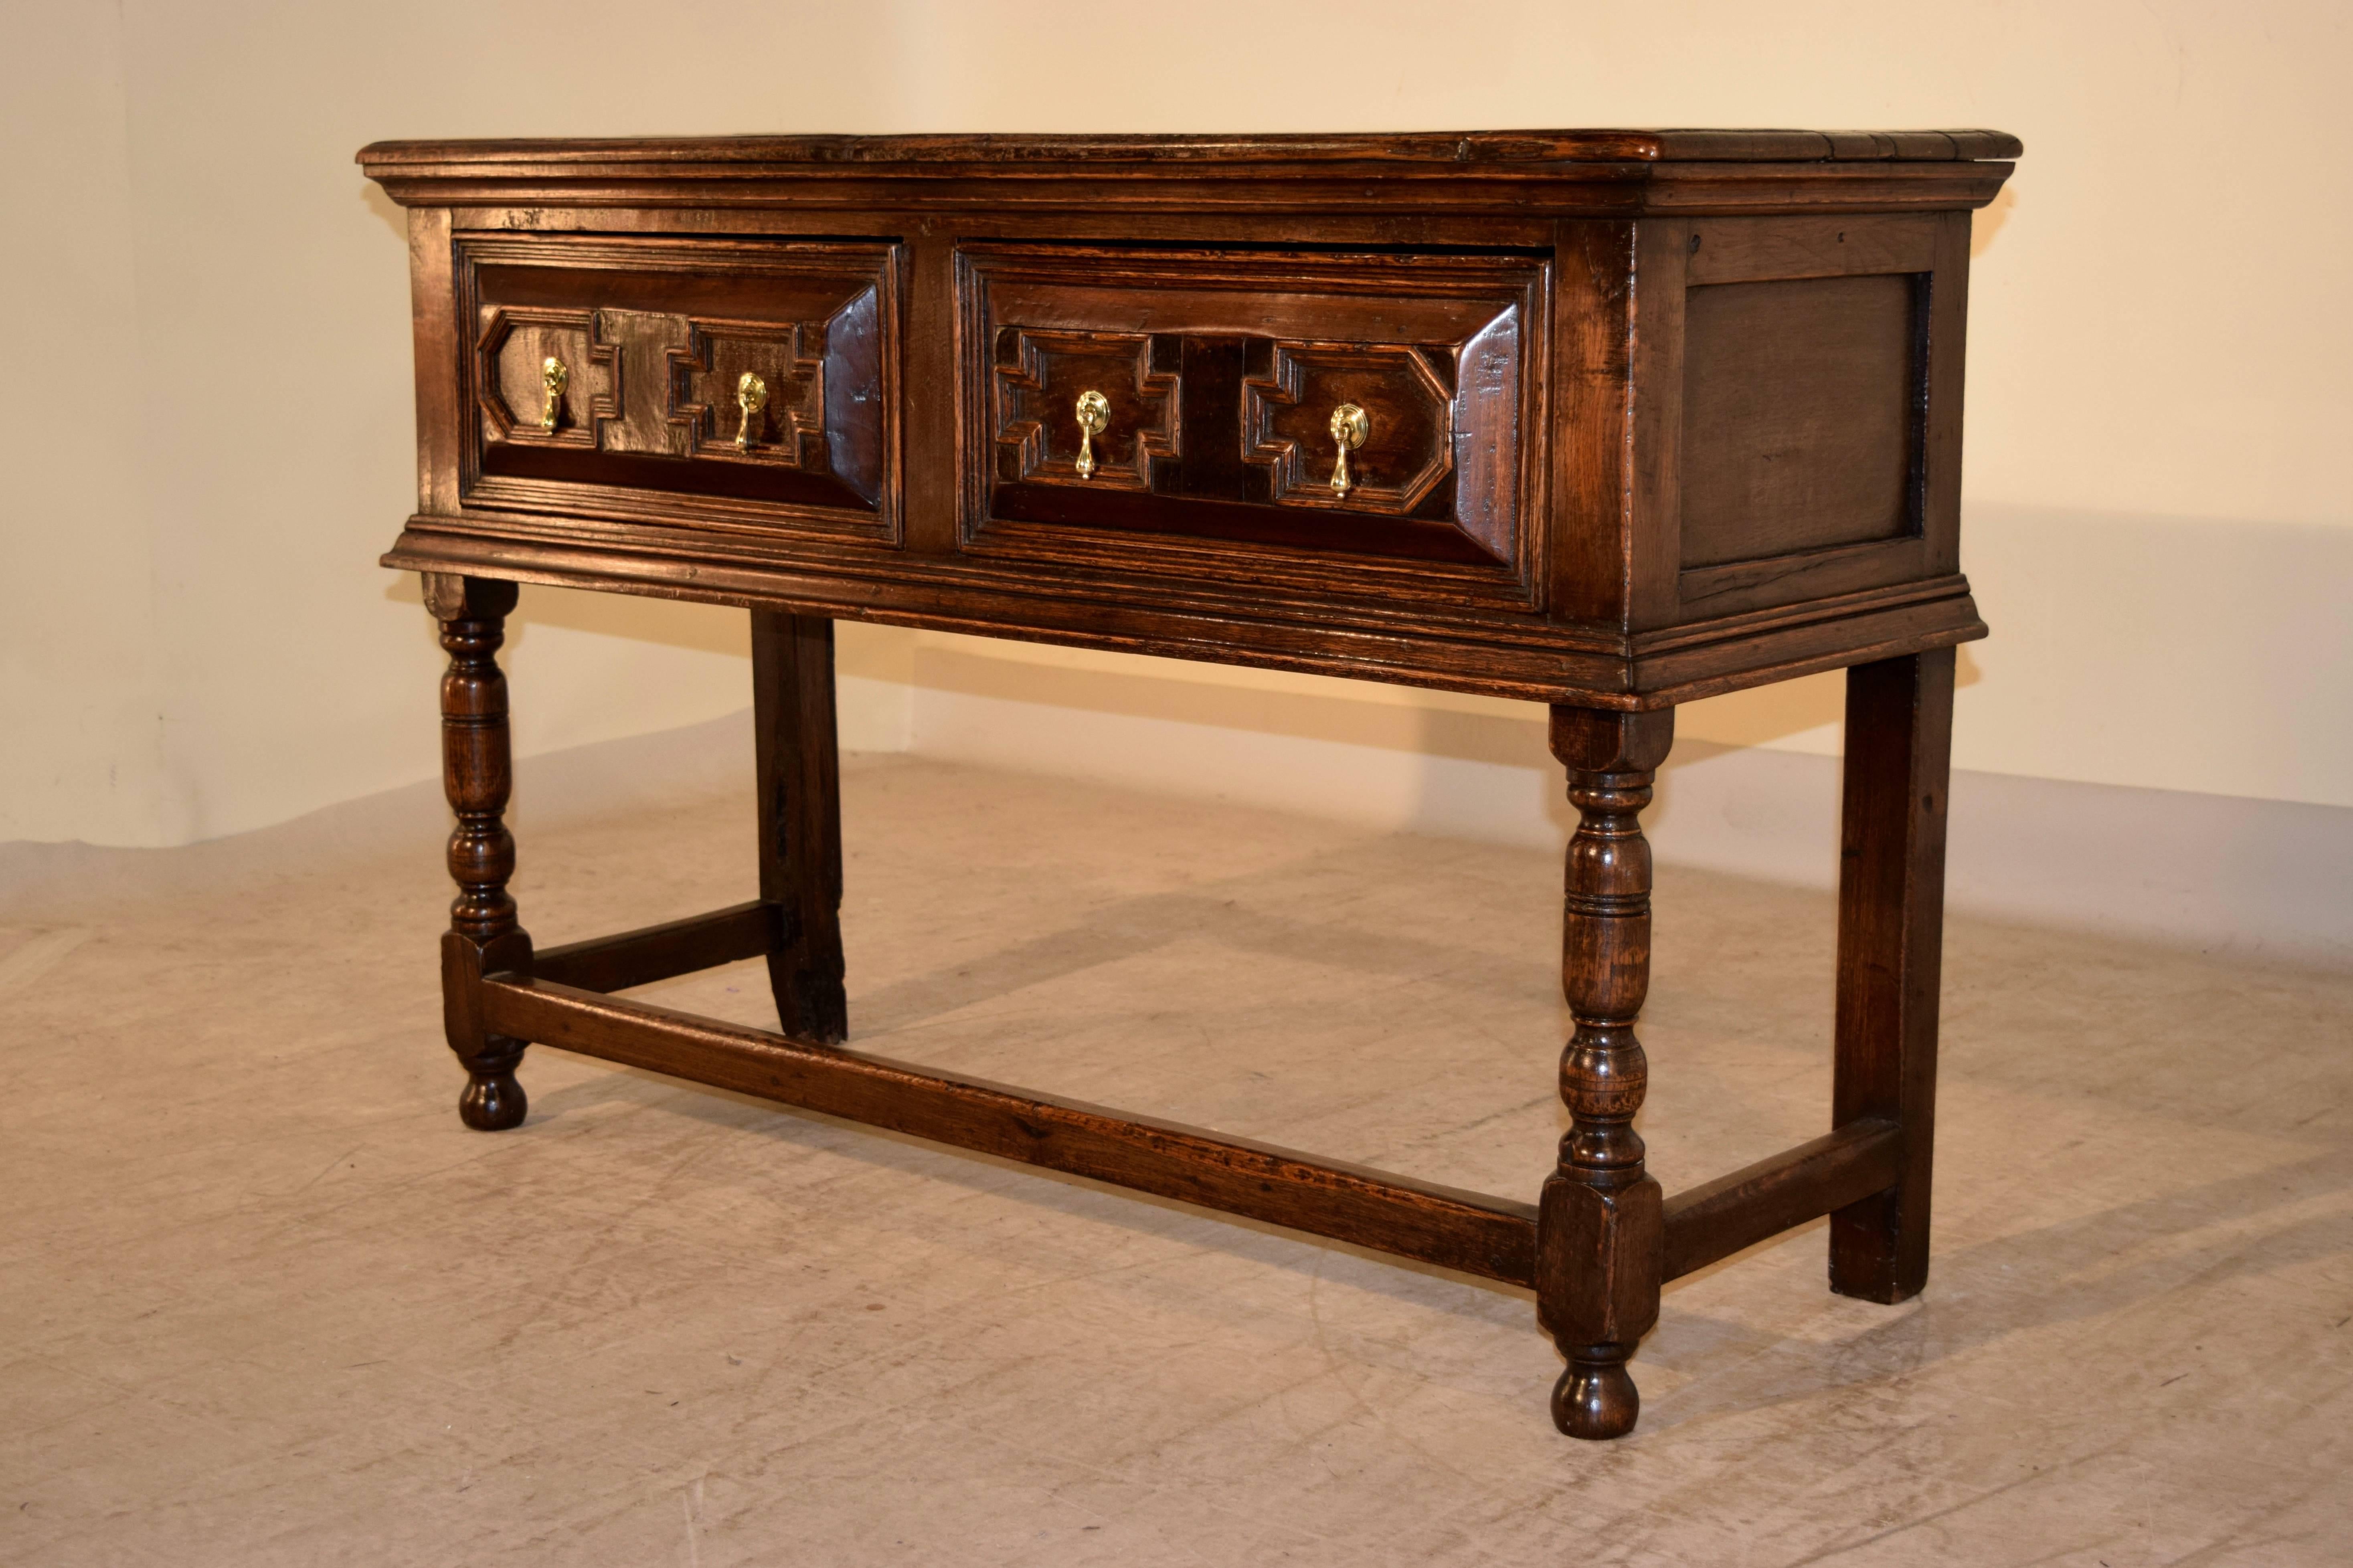 17th century sideboard